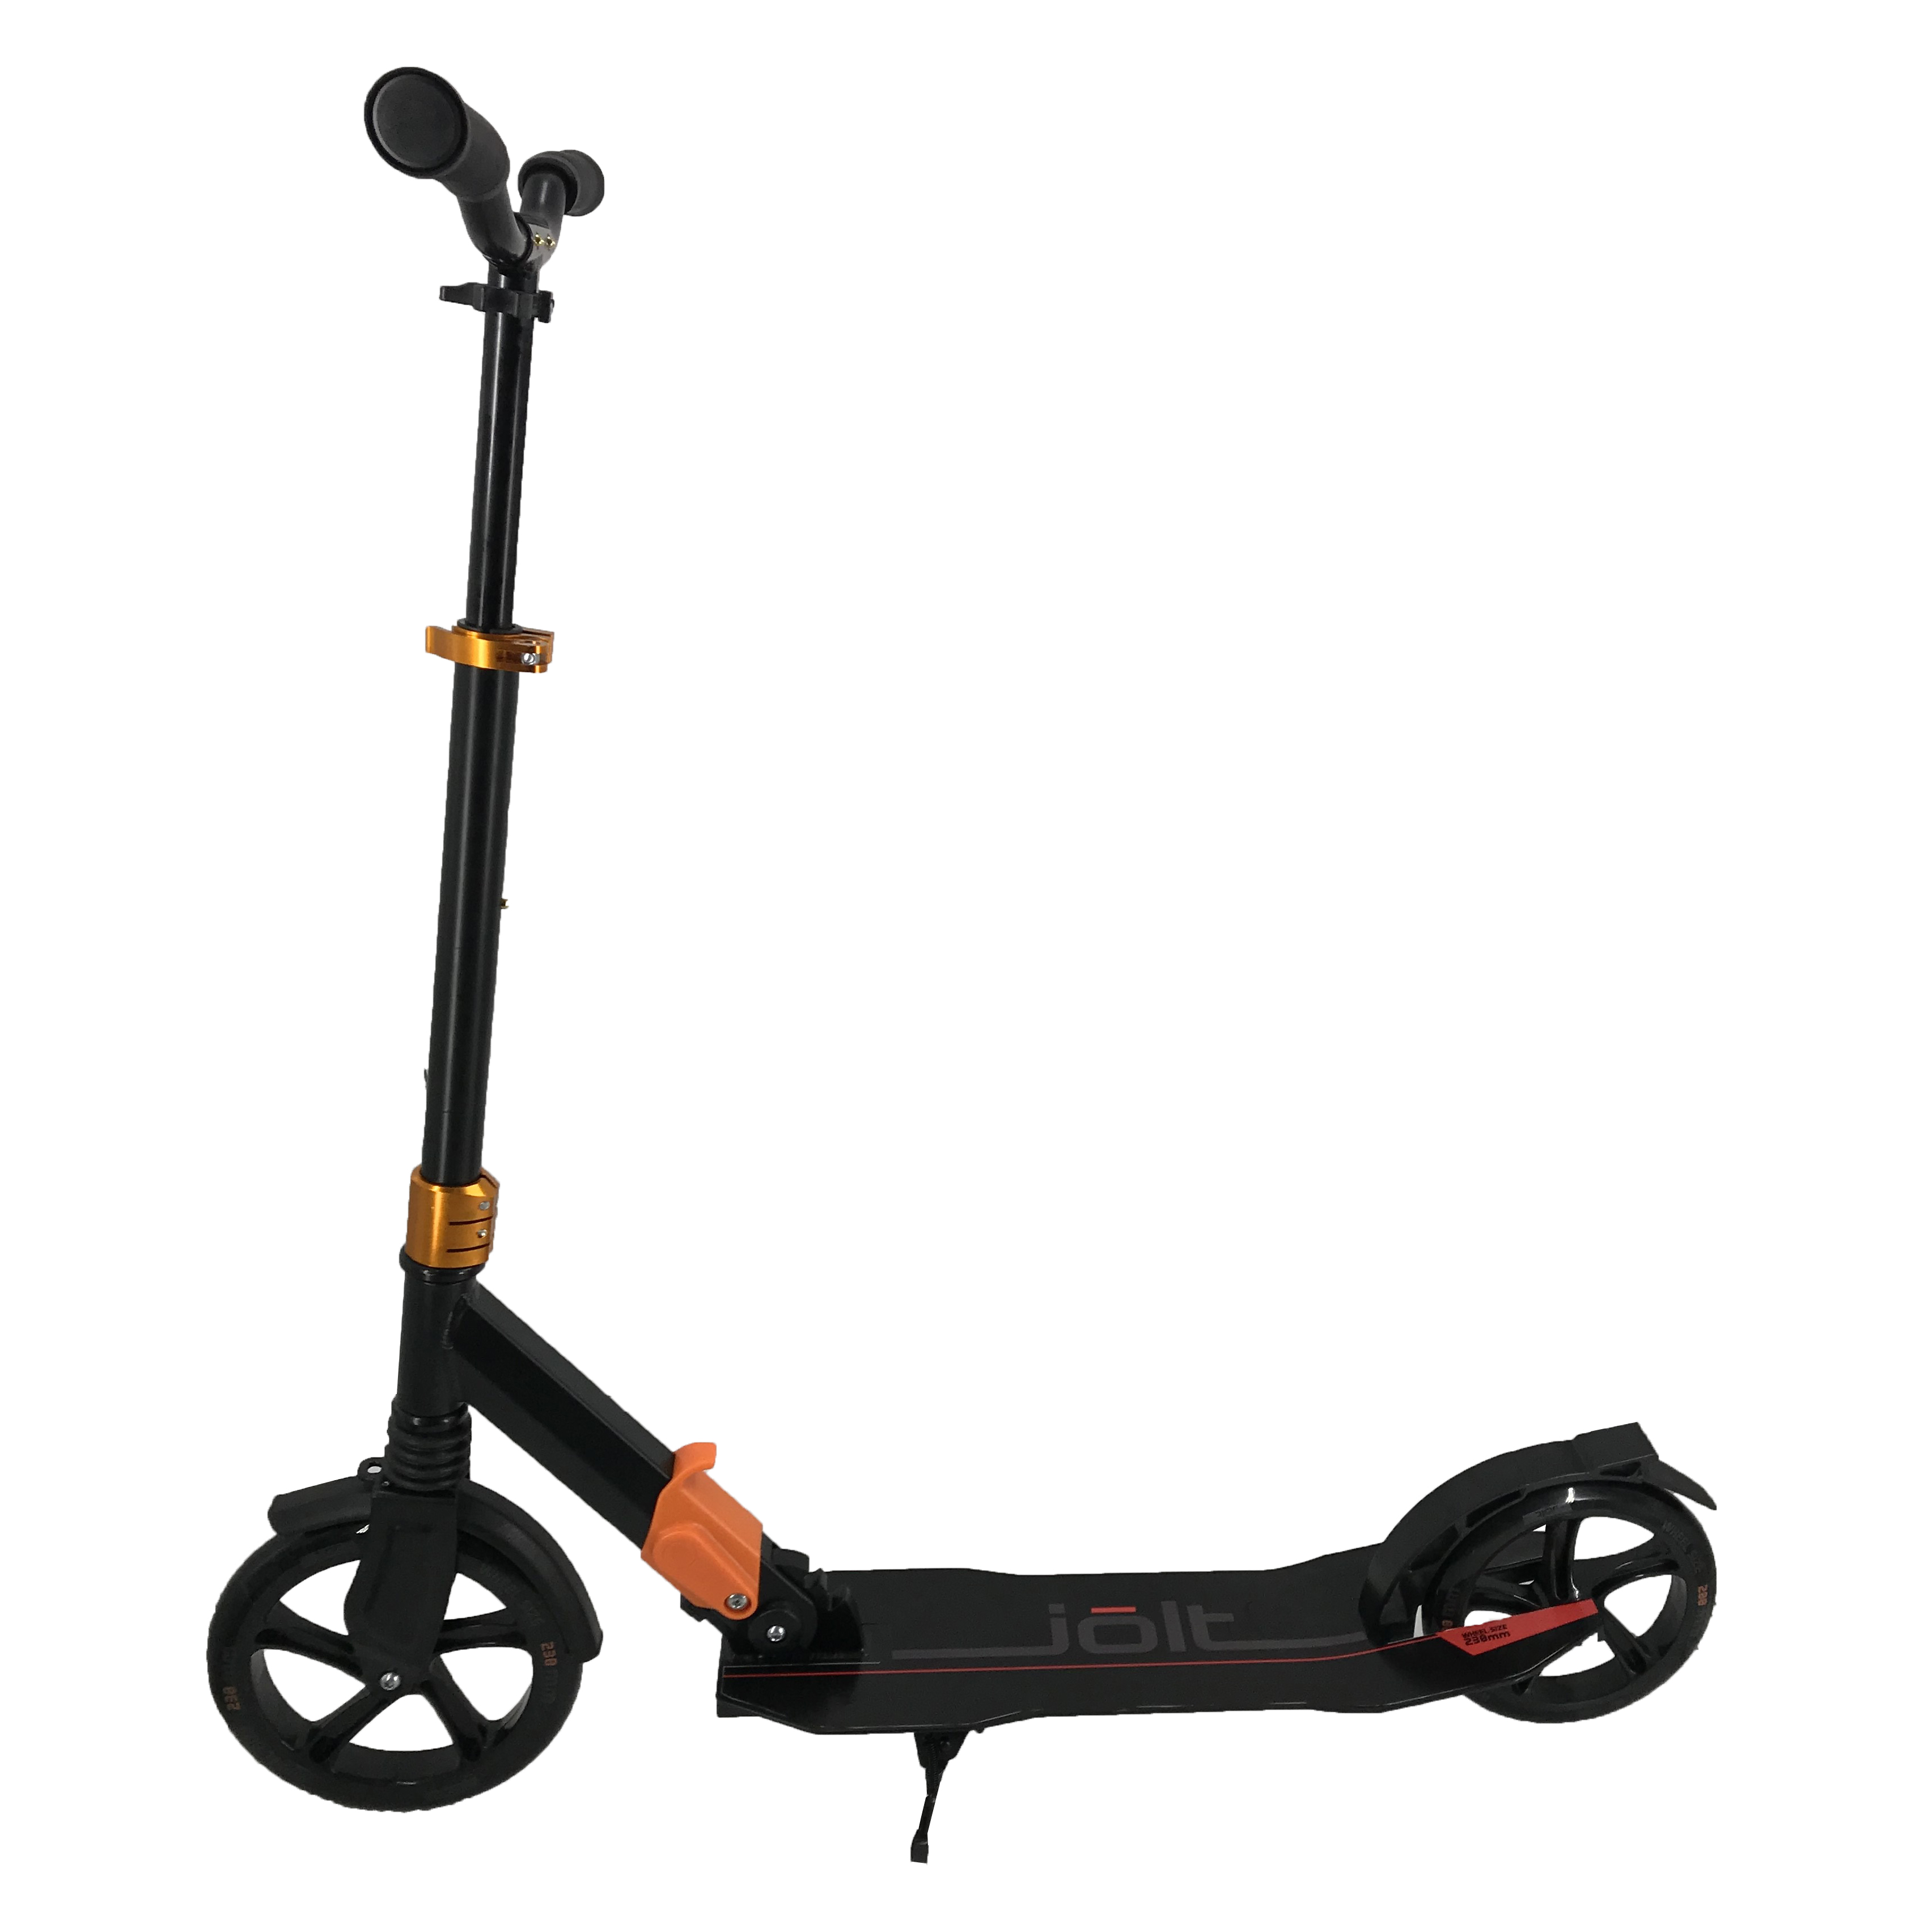 Full aluminum 230mm scooter with front suspension